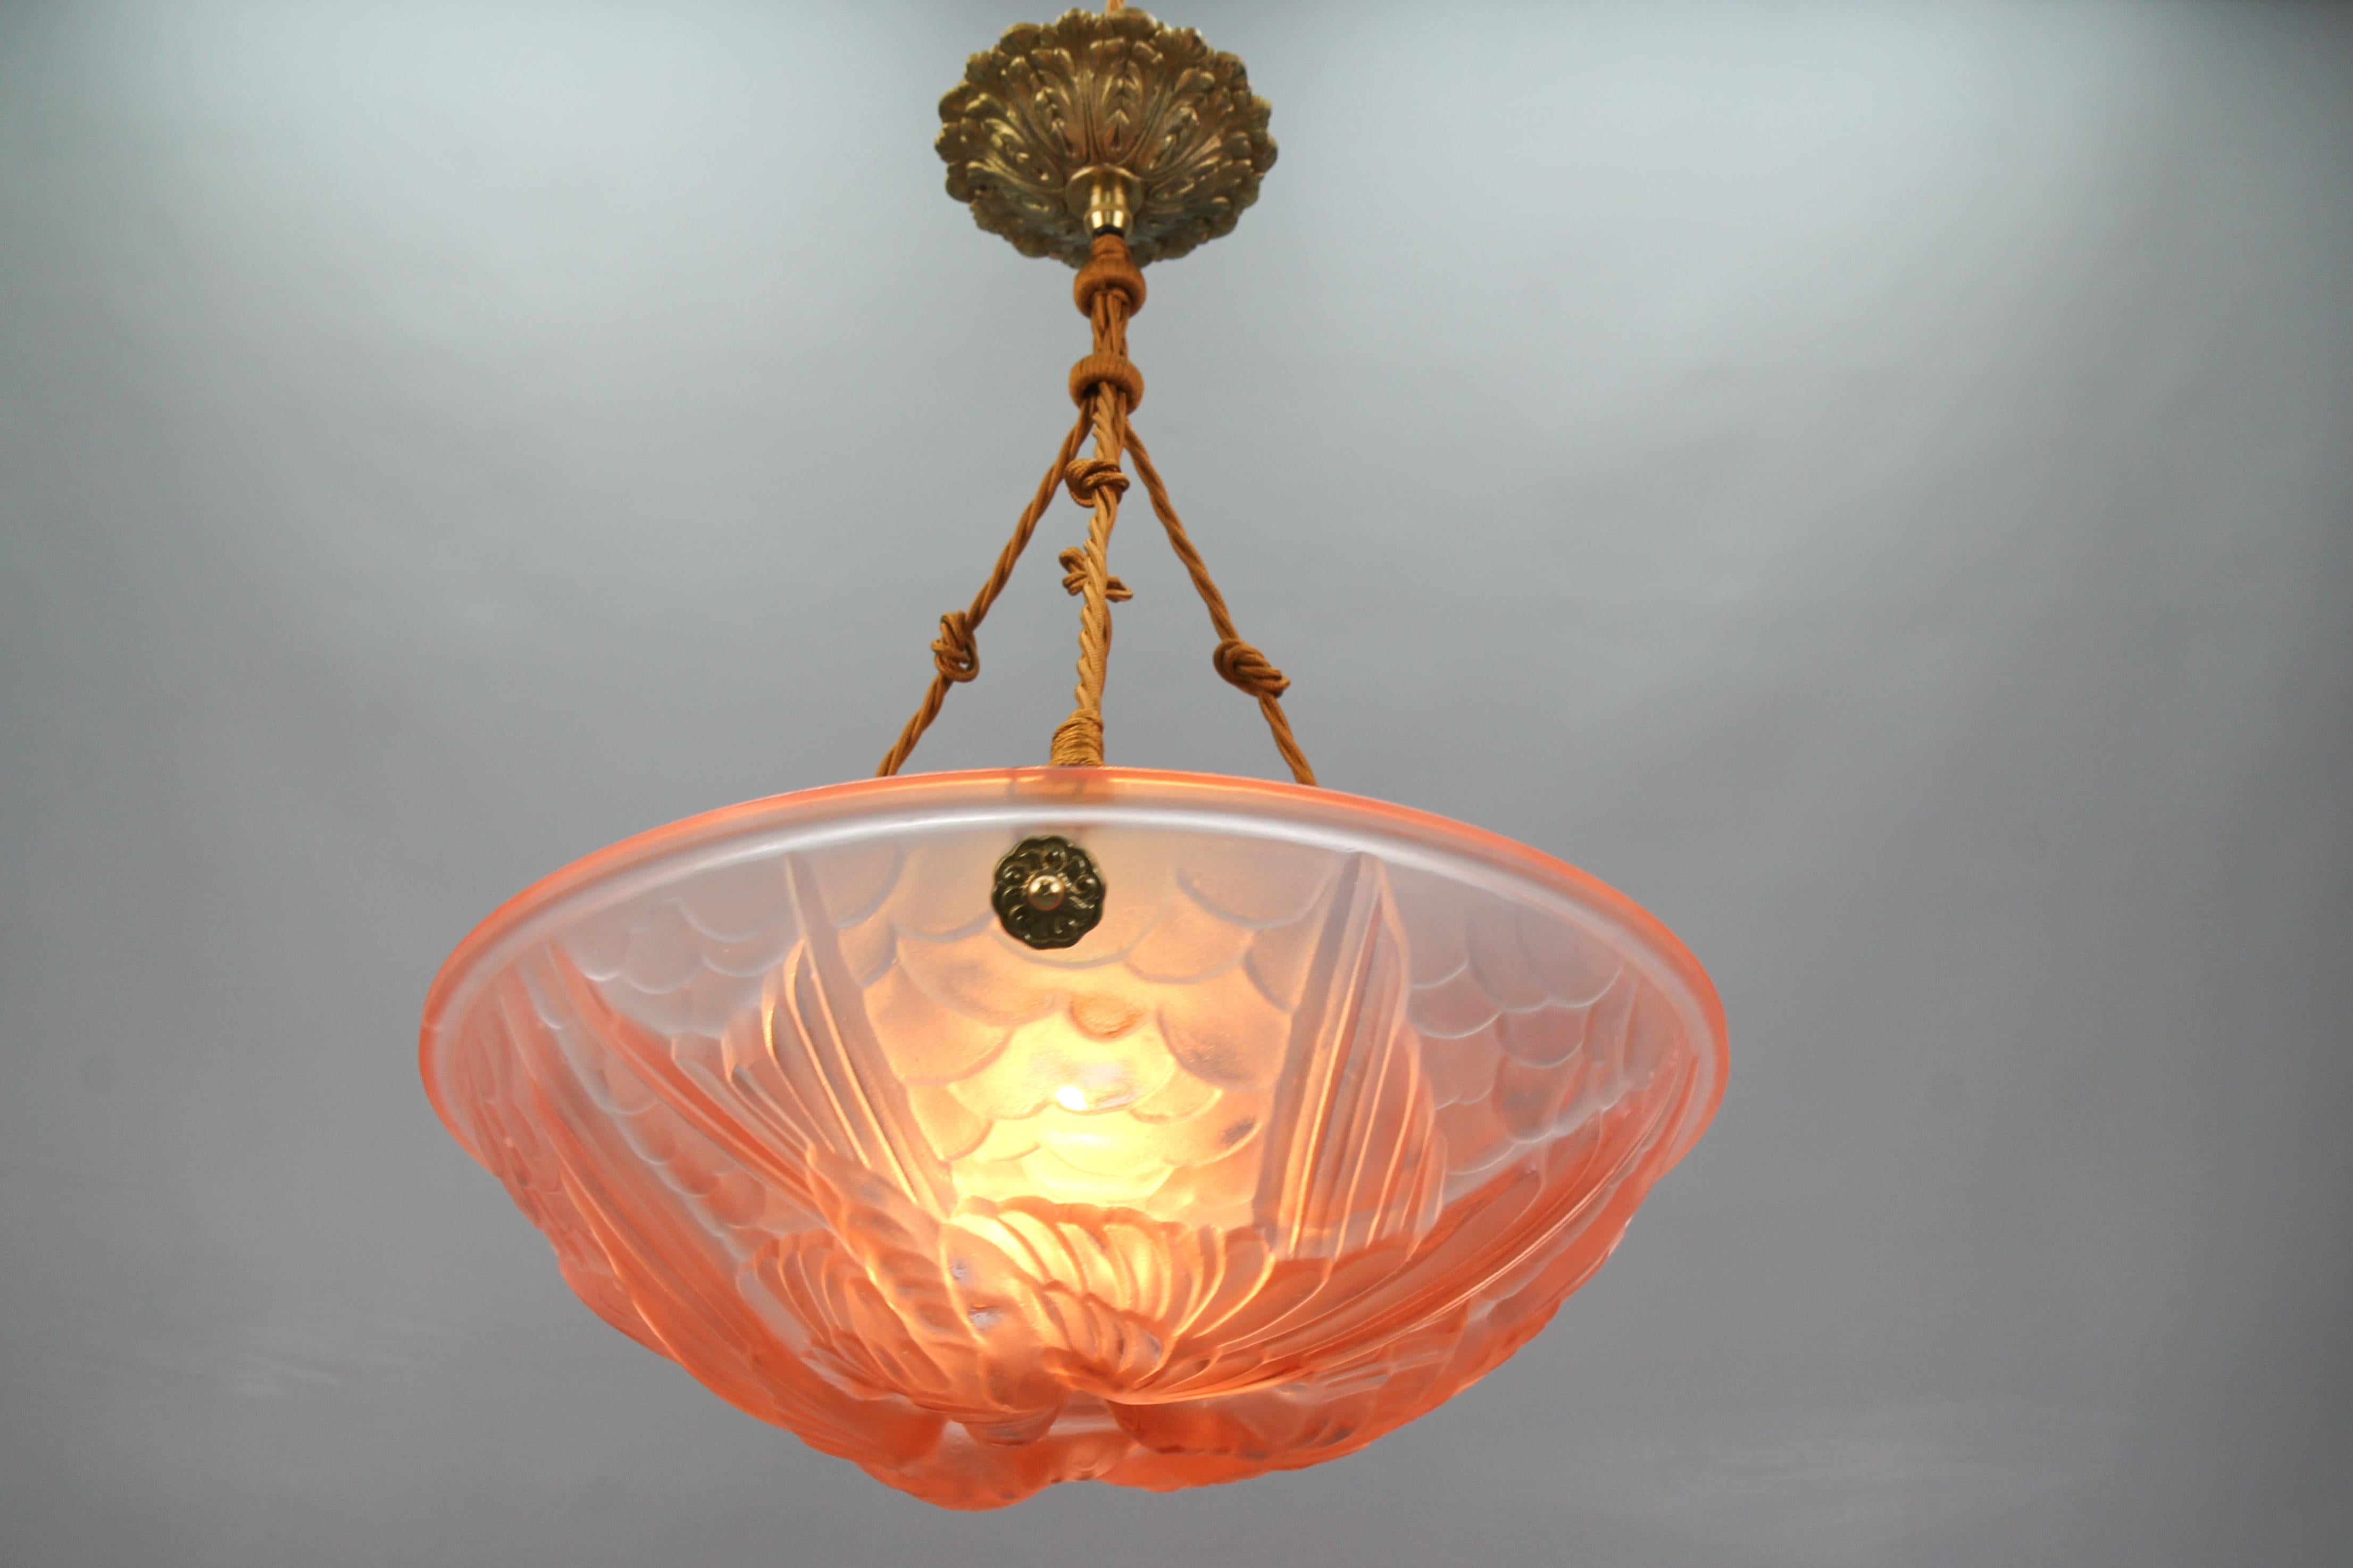 French Art Deco period light pink frosted glass pendant light with bird motifs, the 1930s.
A wonderful pendant ceiling light fixture from circa the 1930s. The beautifully shaped frosted glass bowl in light pink features a relief of three birds,